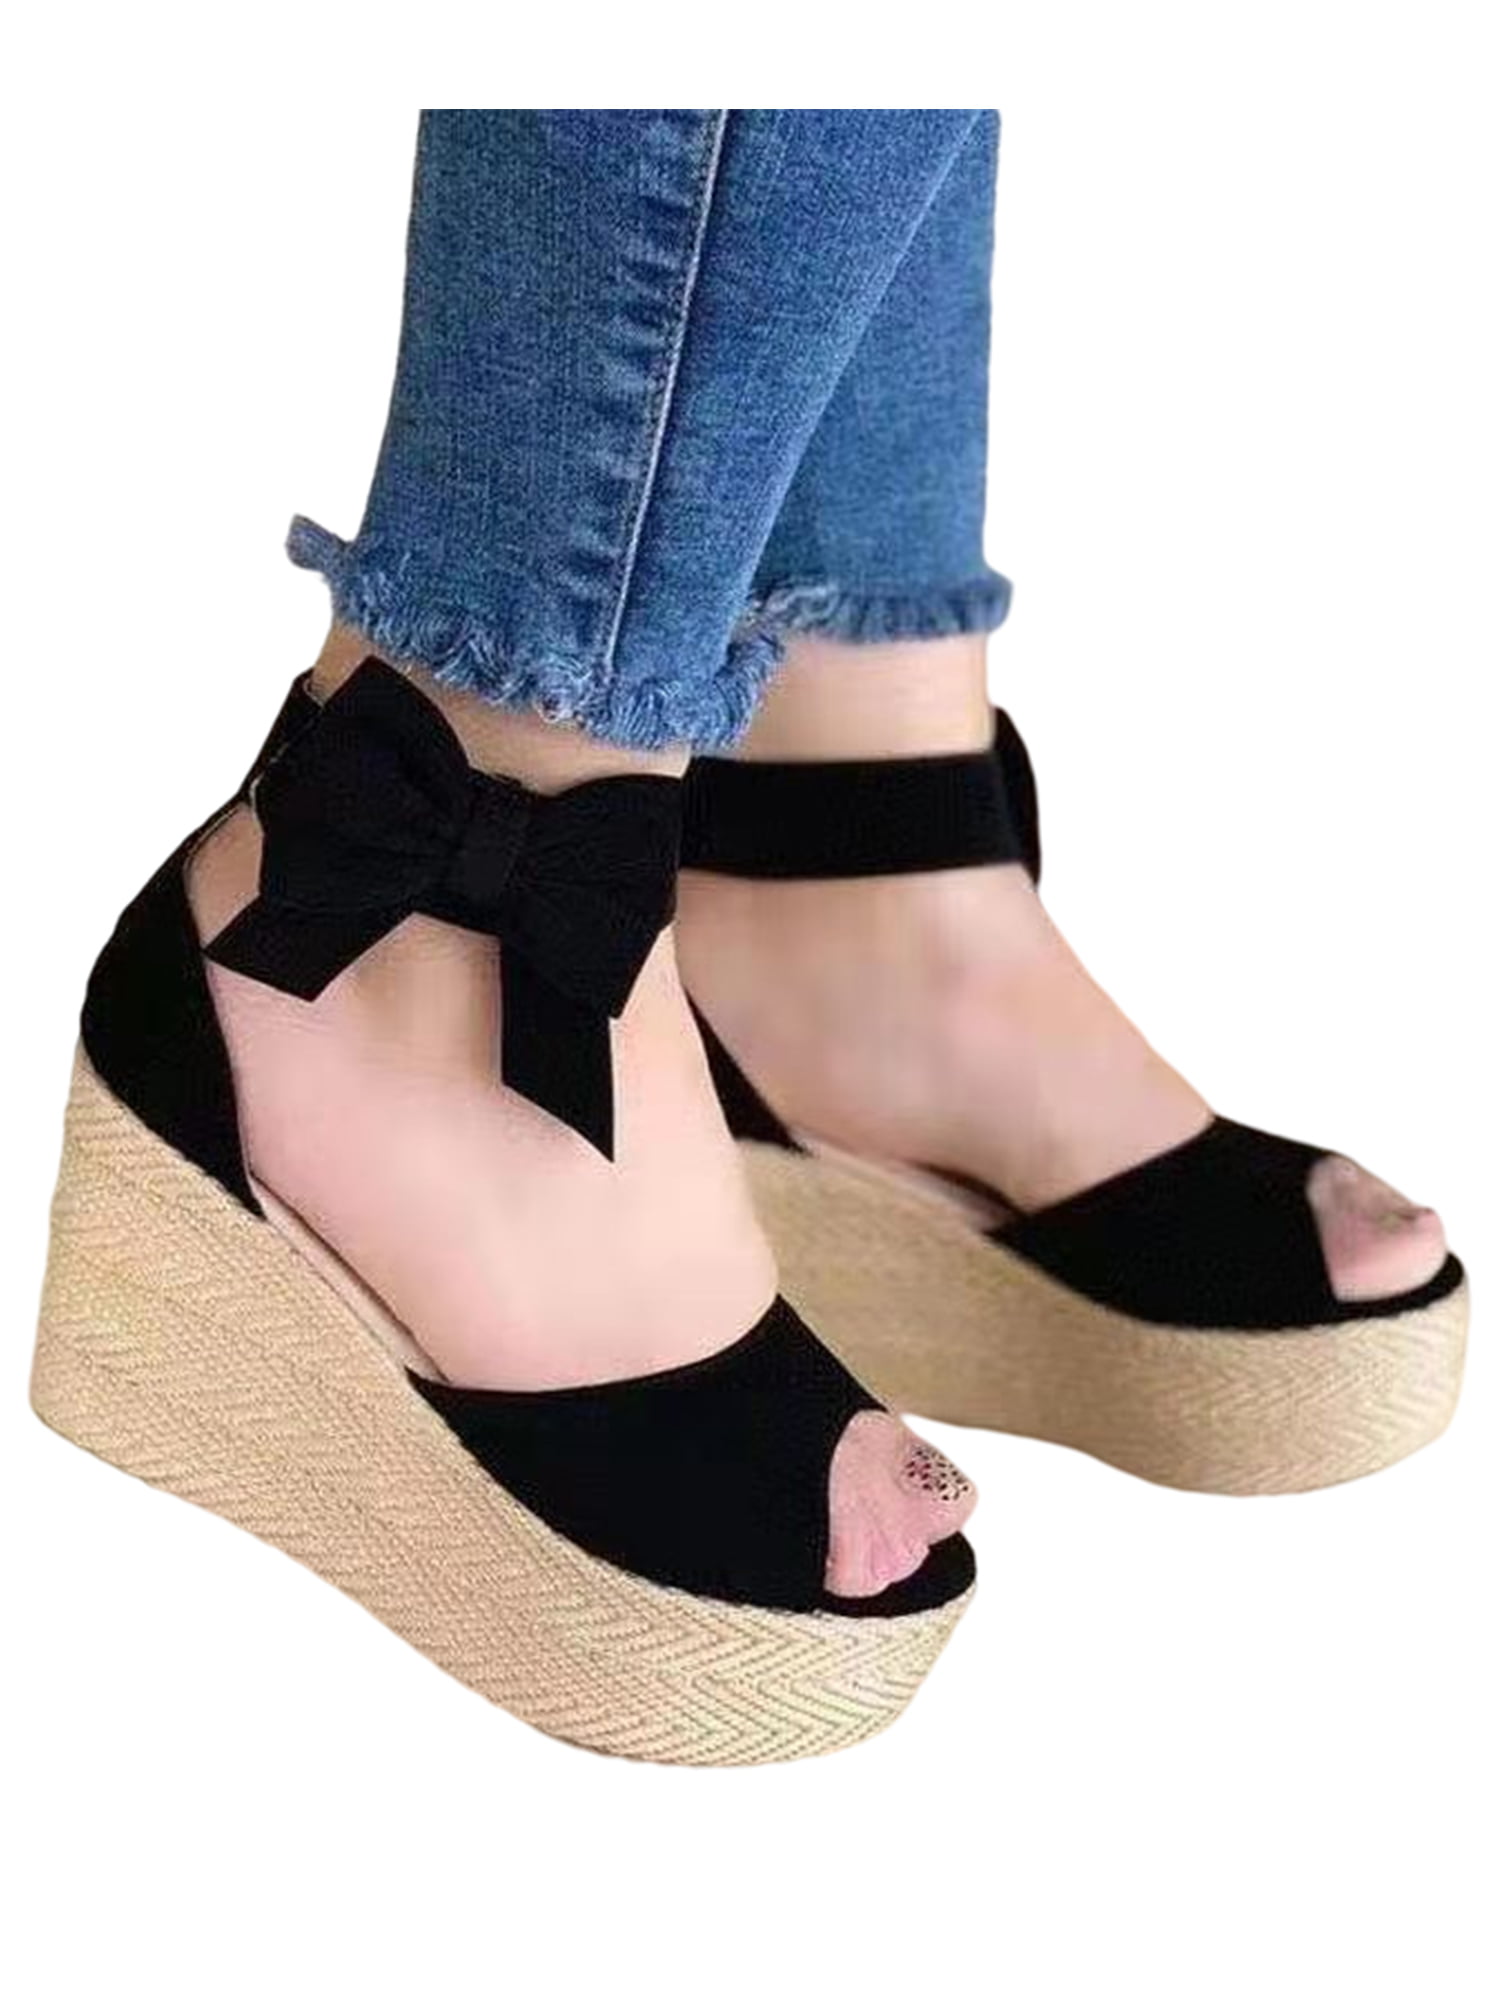 New Womens High Wedge Heel Platform Sandals Studs Ankle Strap Peep Toe Shoes 